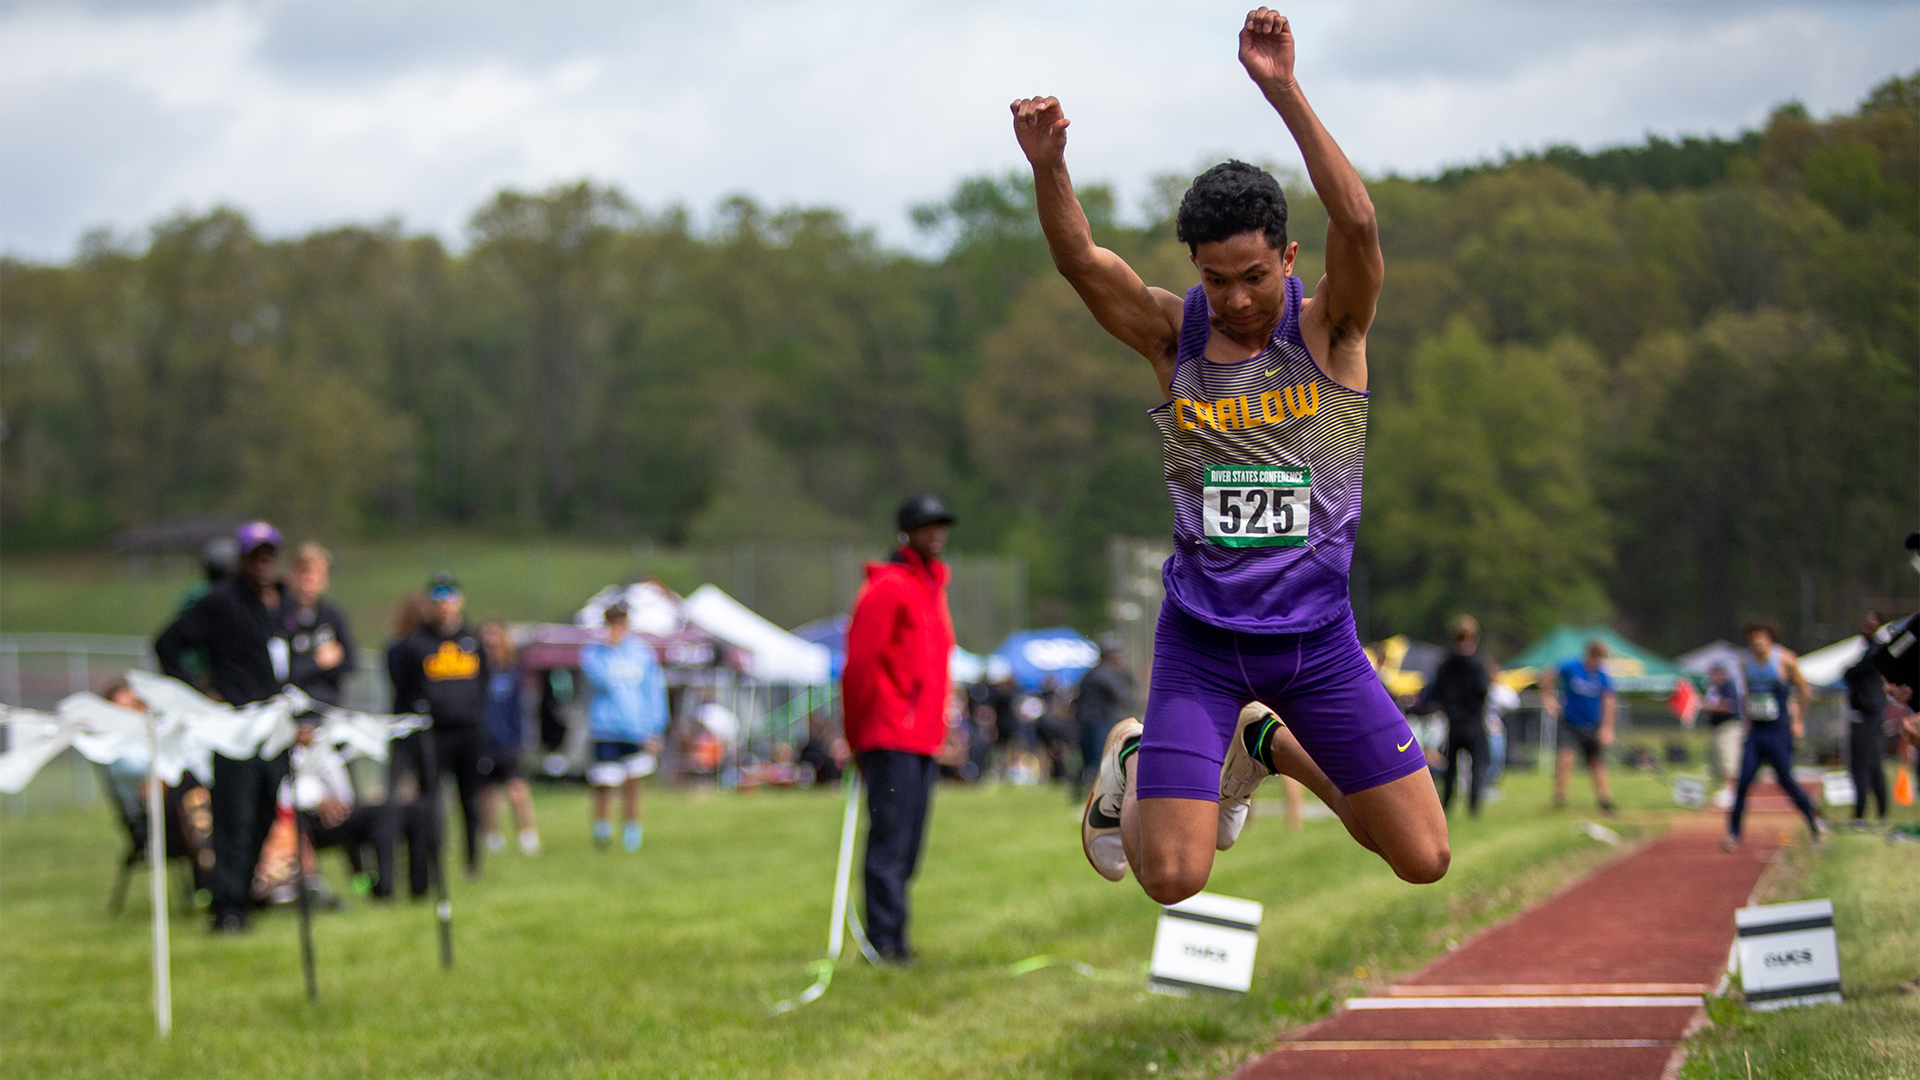 Shajit Pokwal took third in long jump. Archived photo by William Conley.